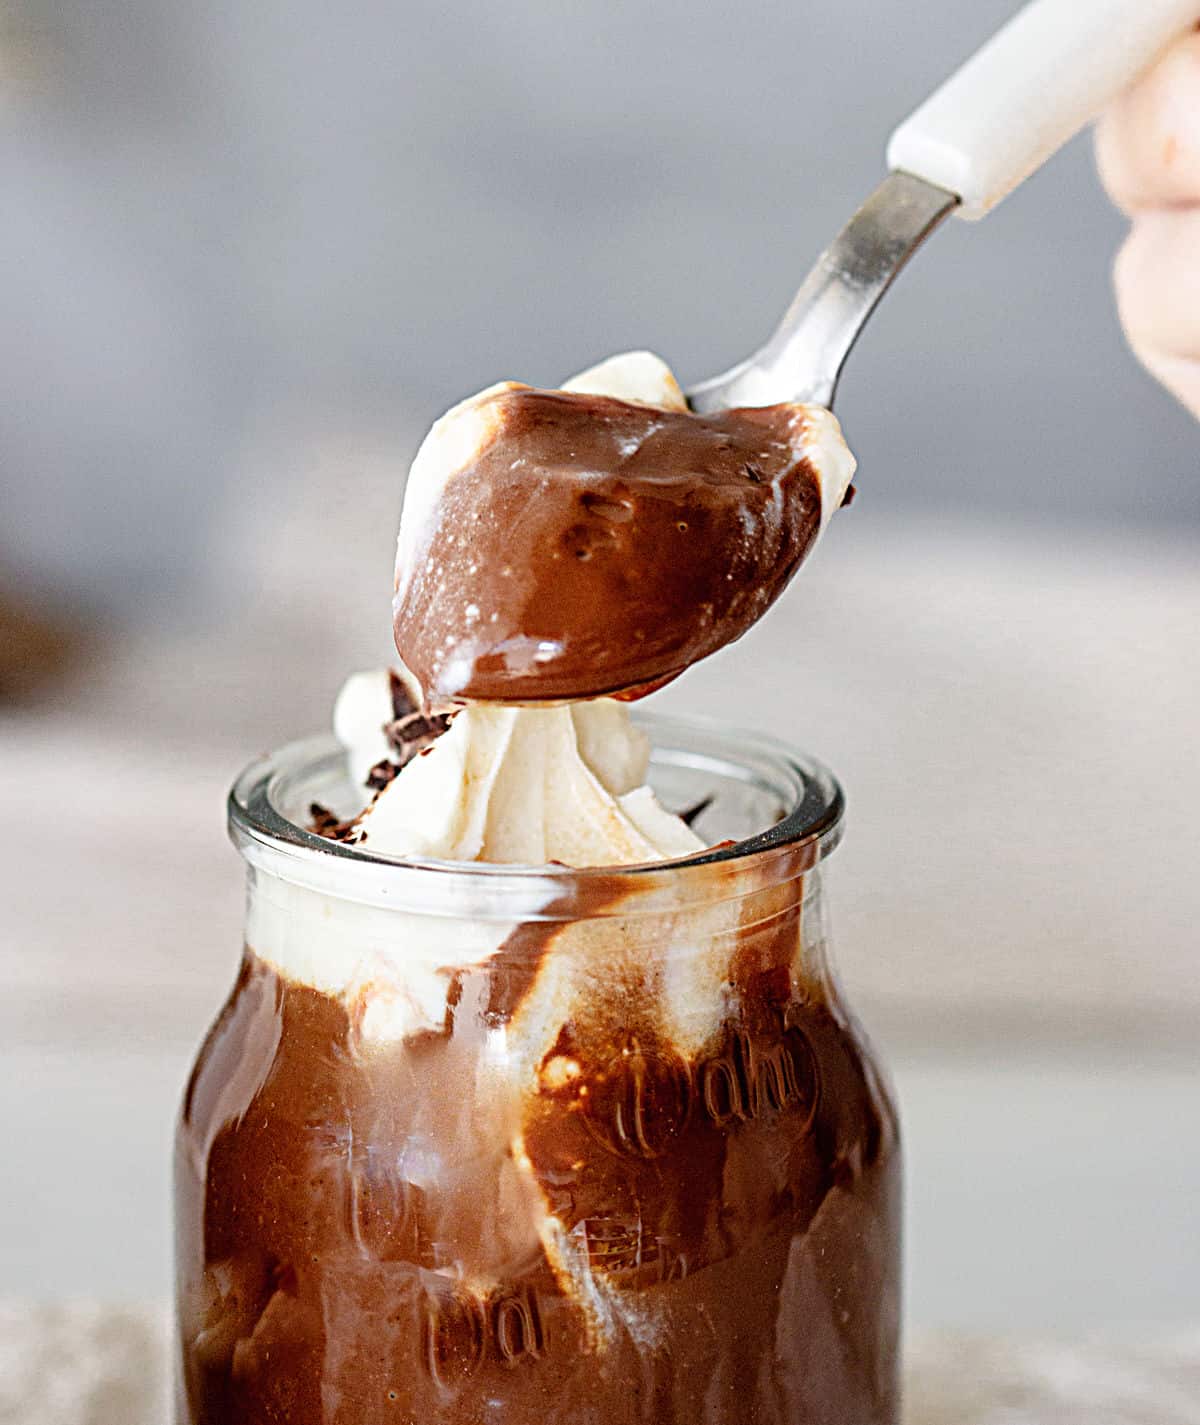 Hand spooning chocolate cream pudding from glass jar